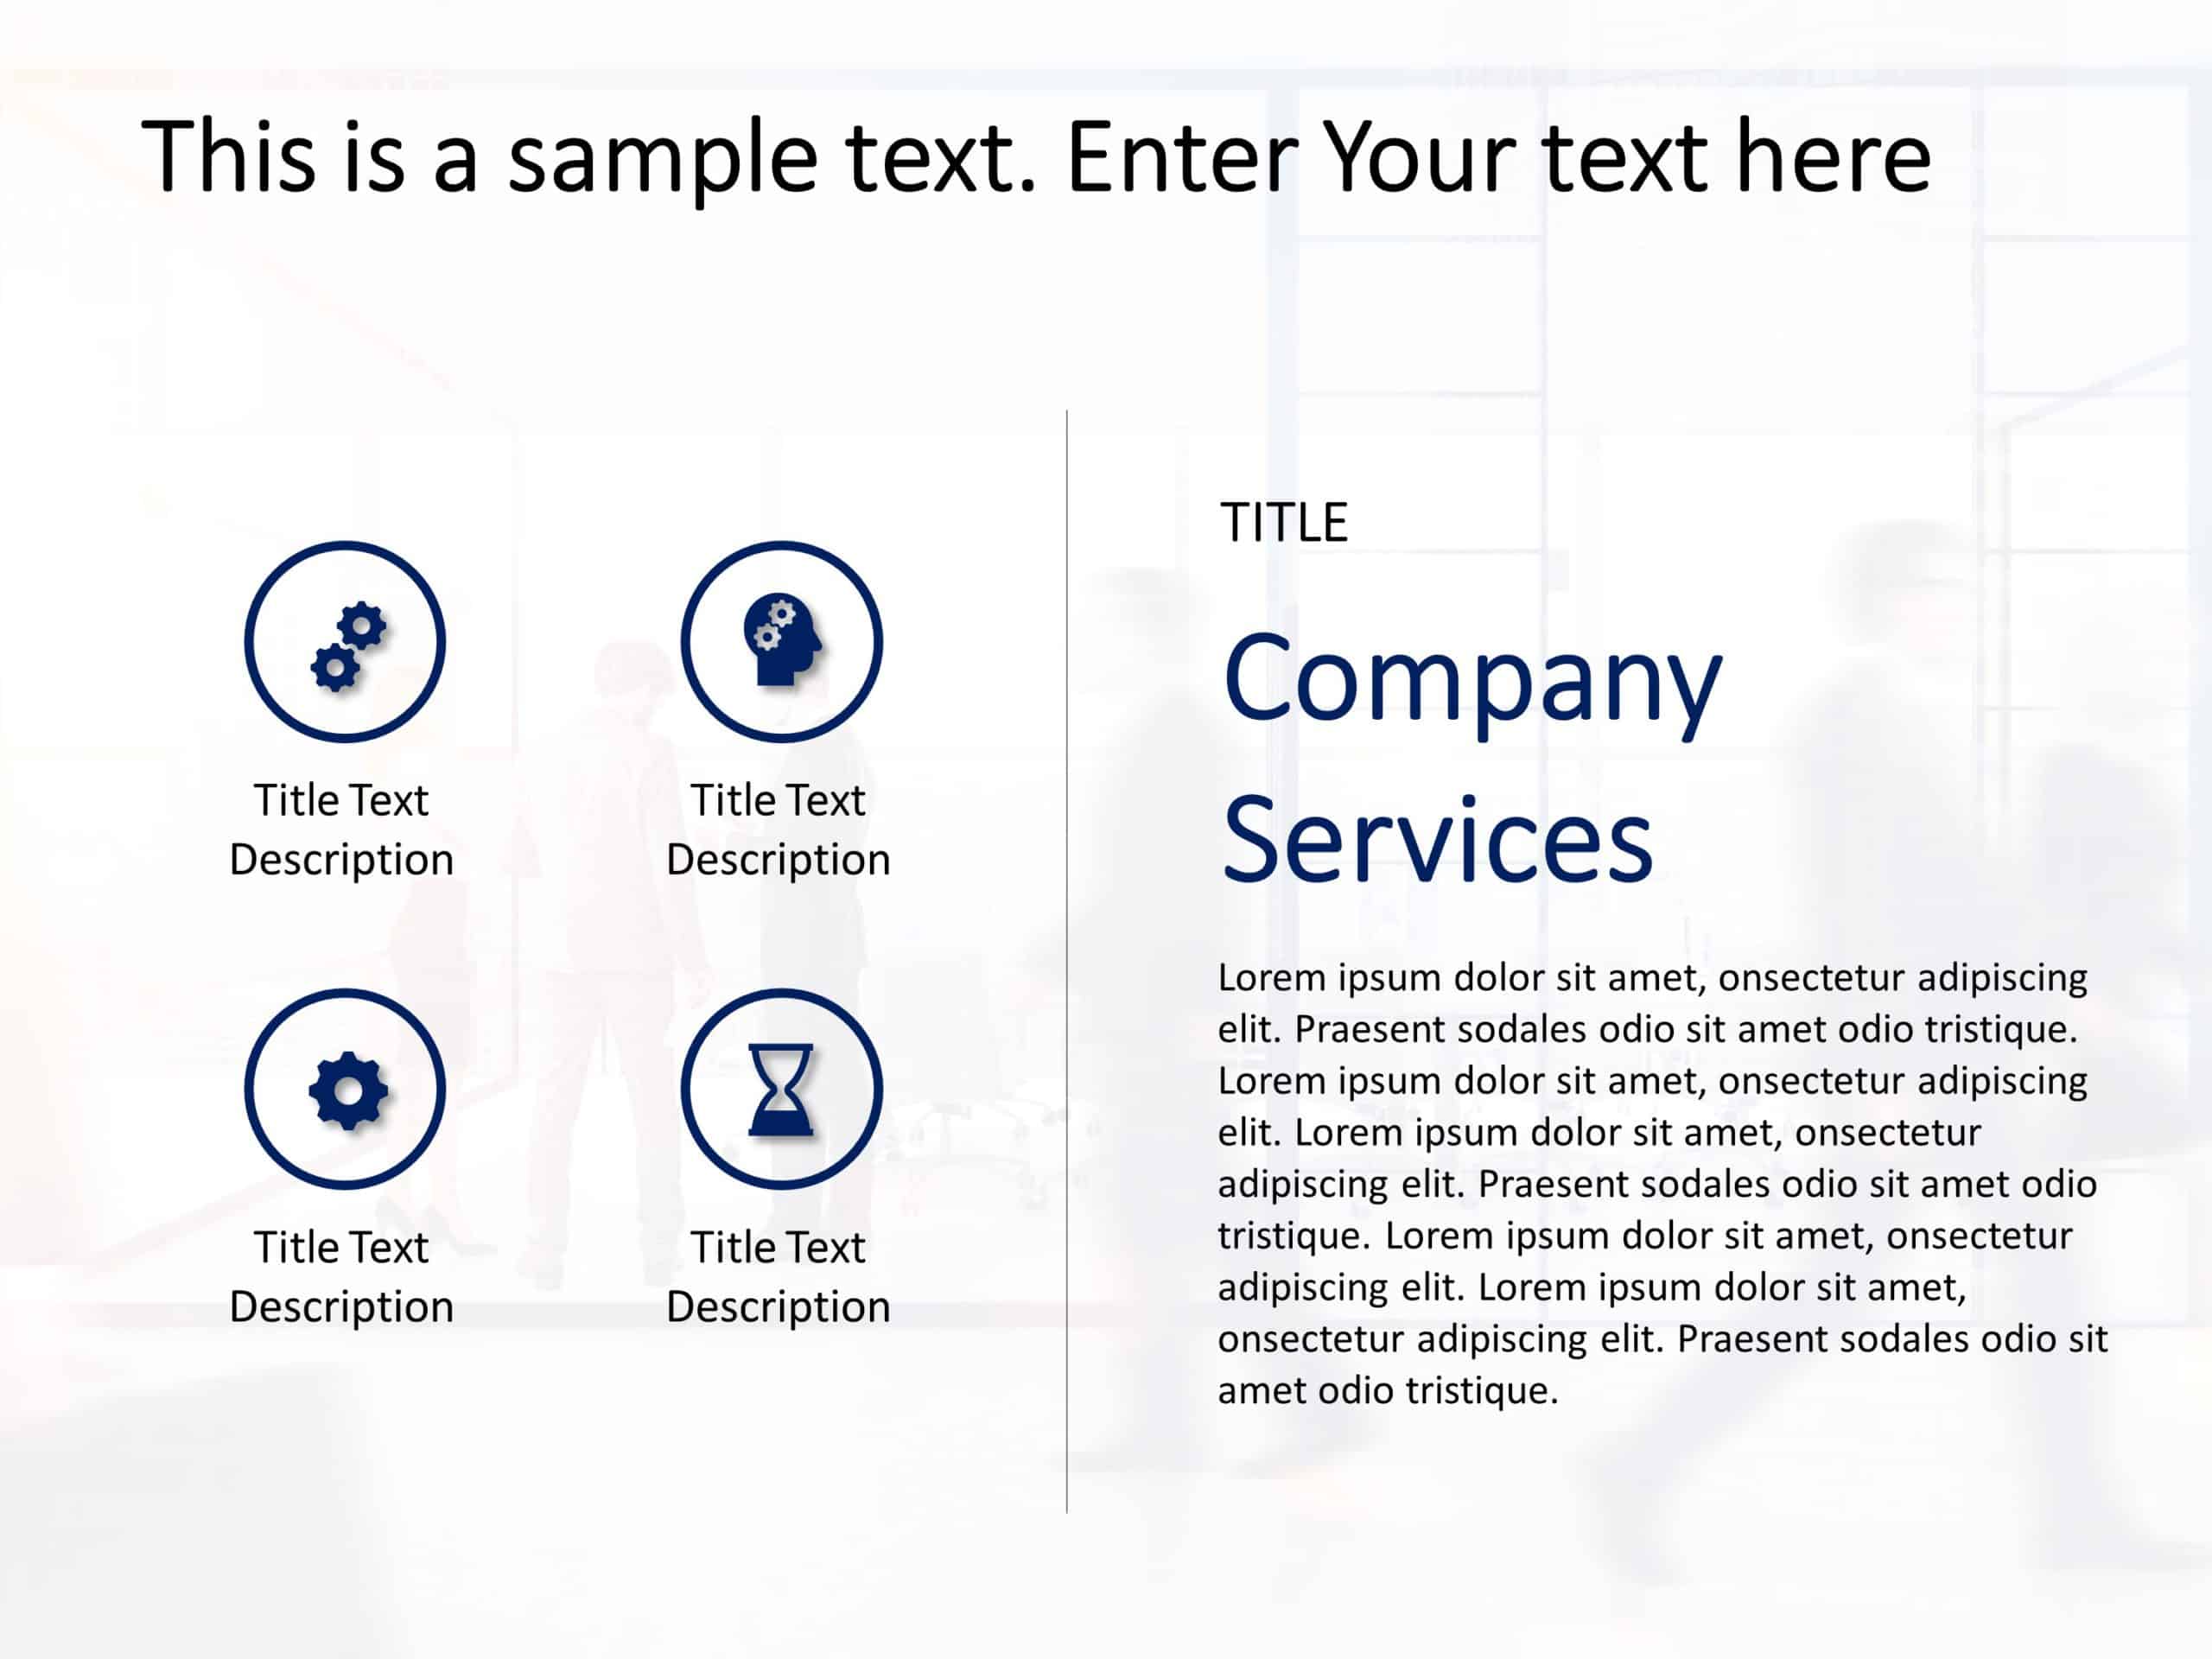 Company Services 1 PowerPoint Template